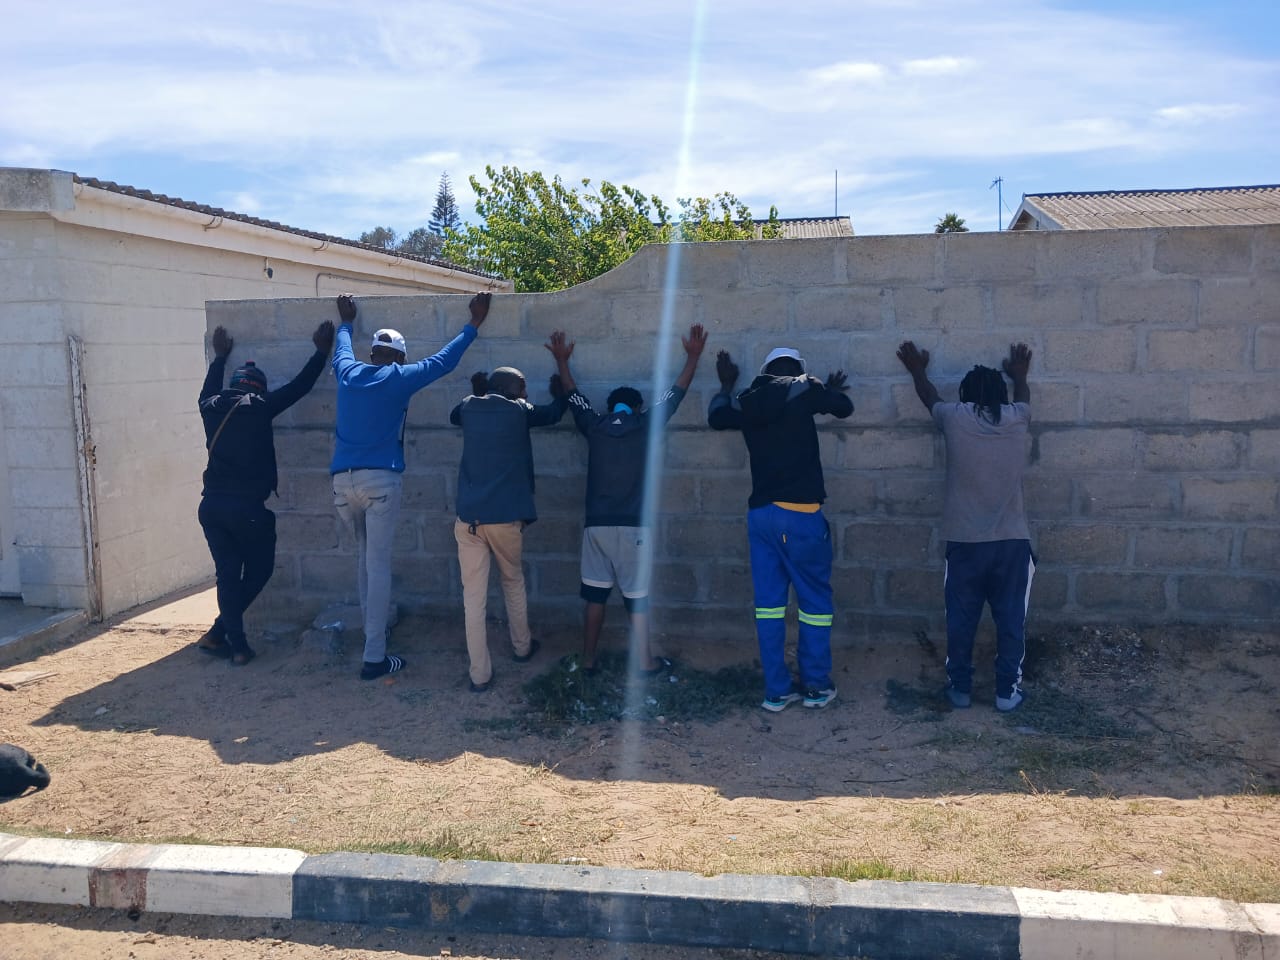 Operation Vala Umgodi removes drugs from the streets in the Northern Cape